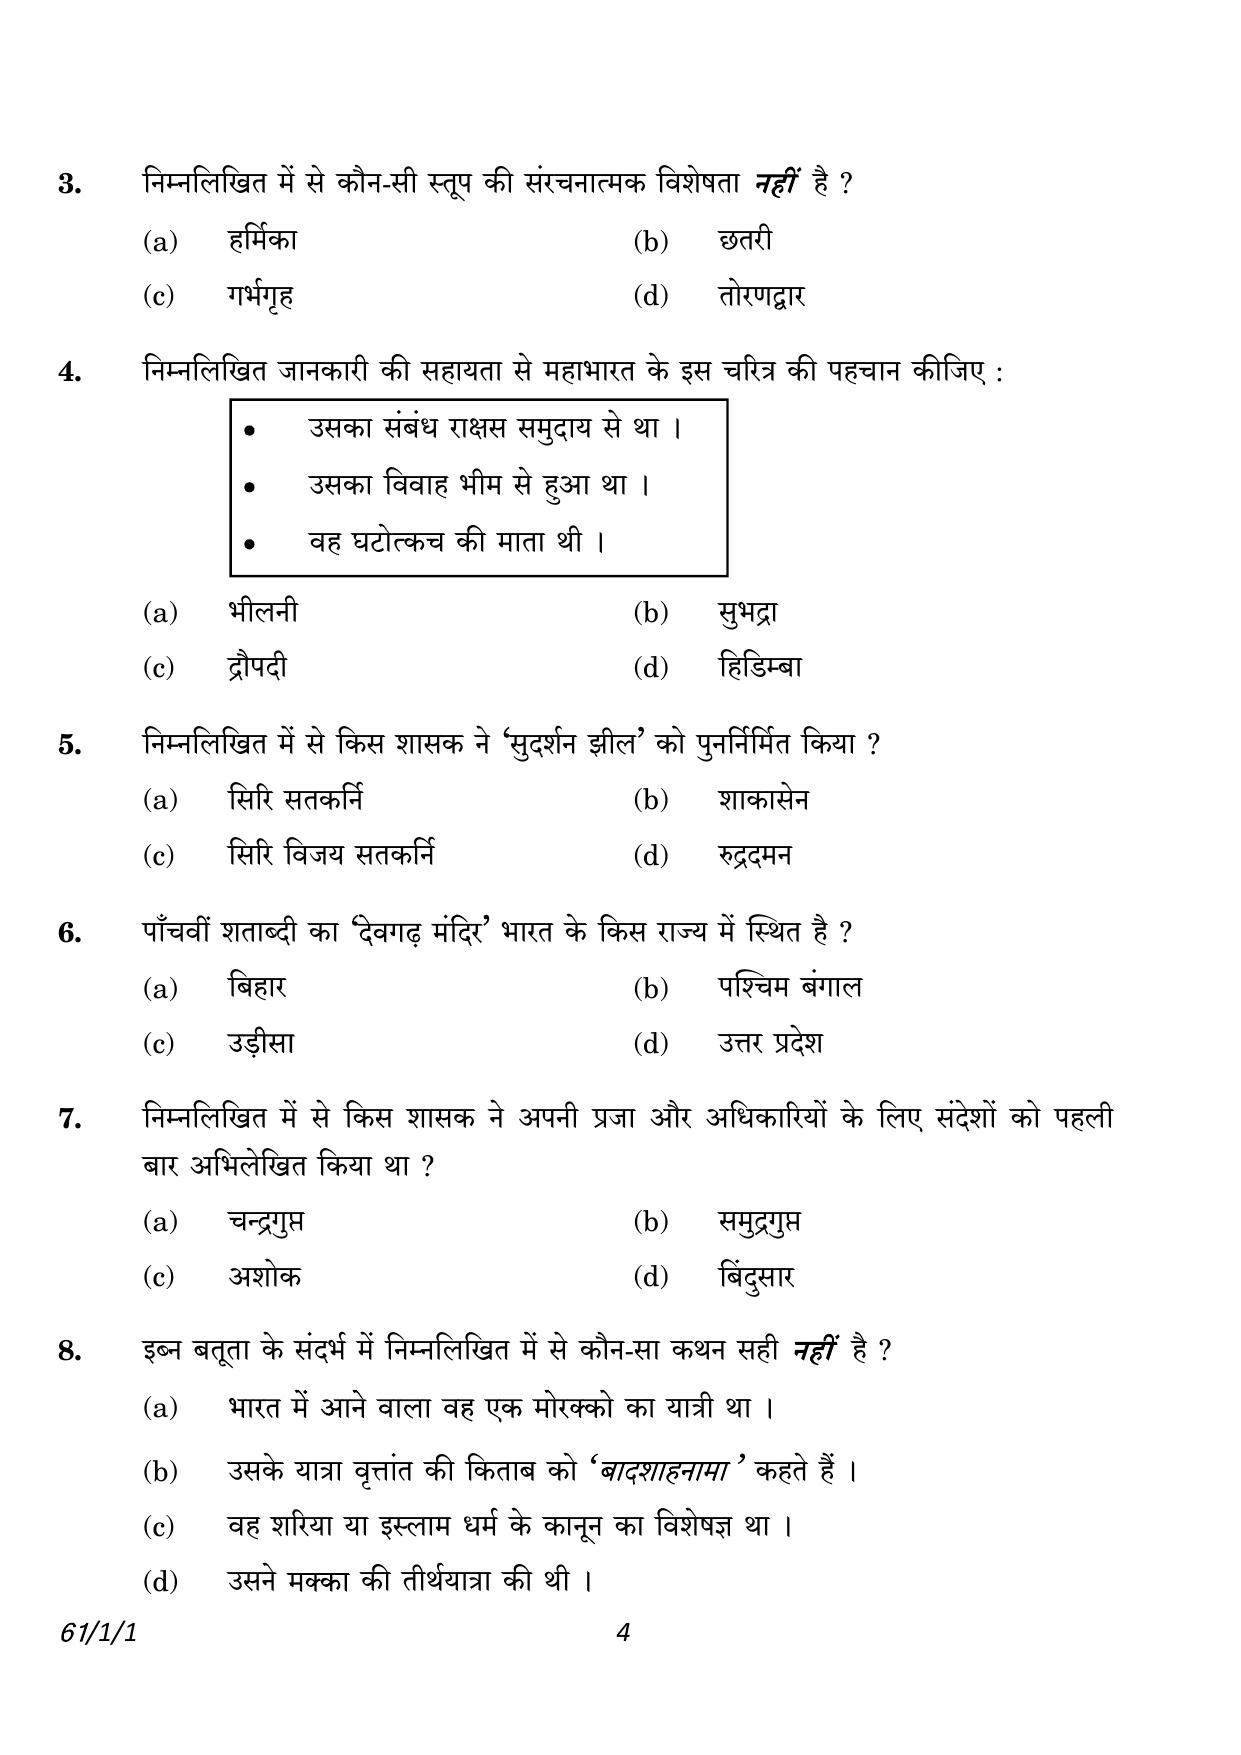 CBSE Class 12 61-1-1 History 2023 Question Paper - Page 4